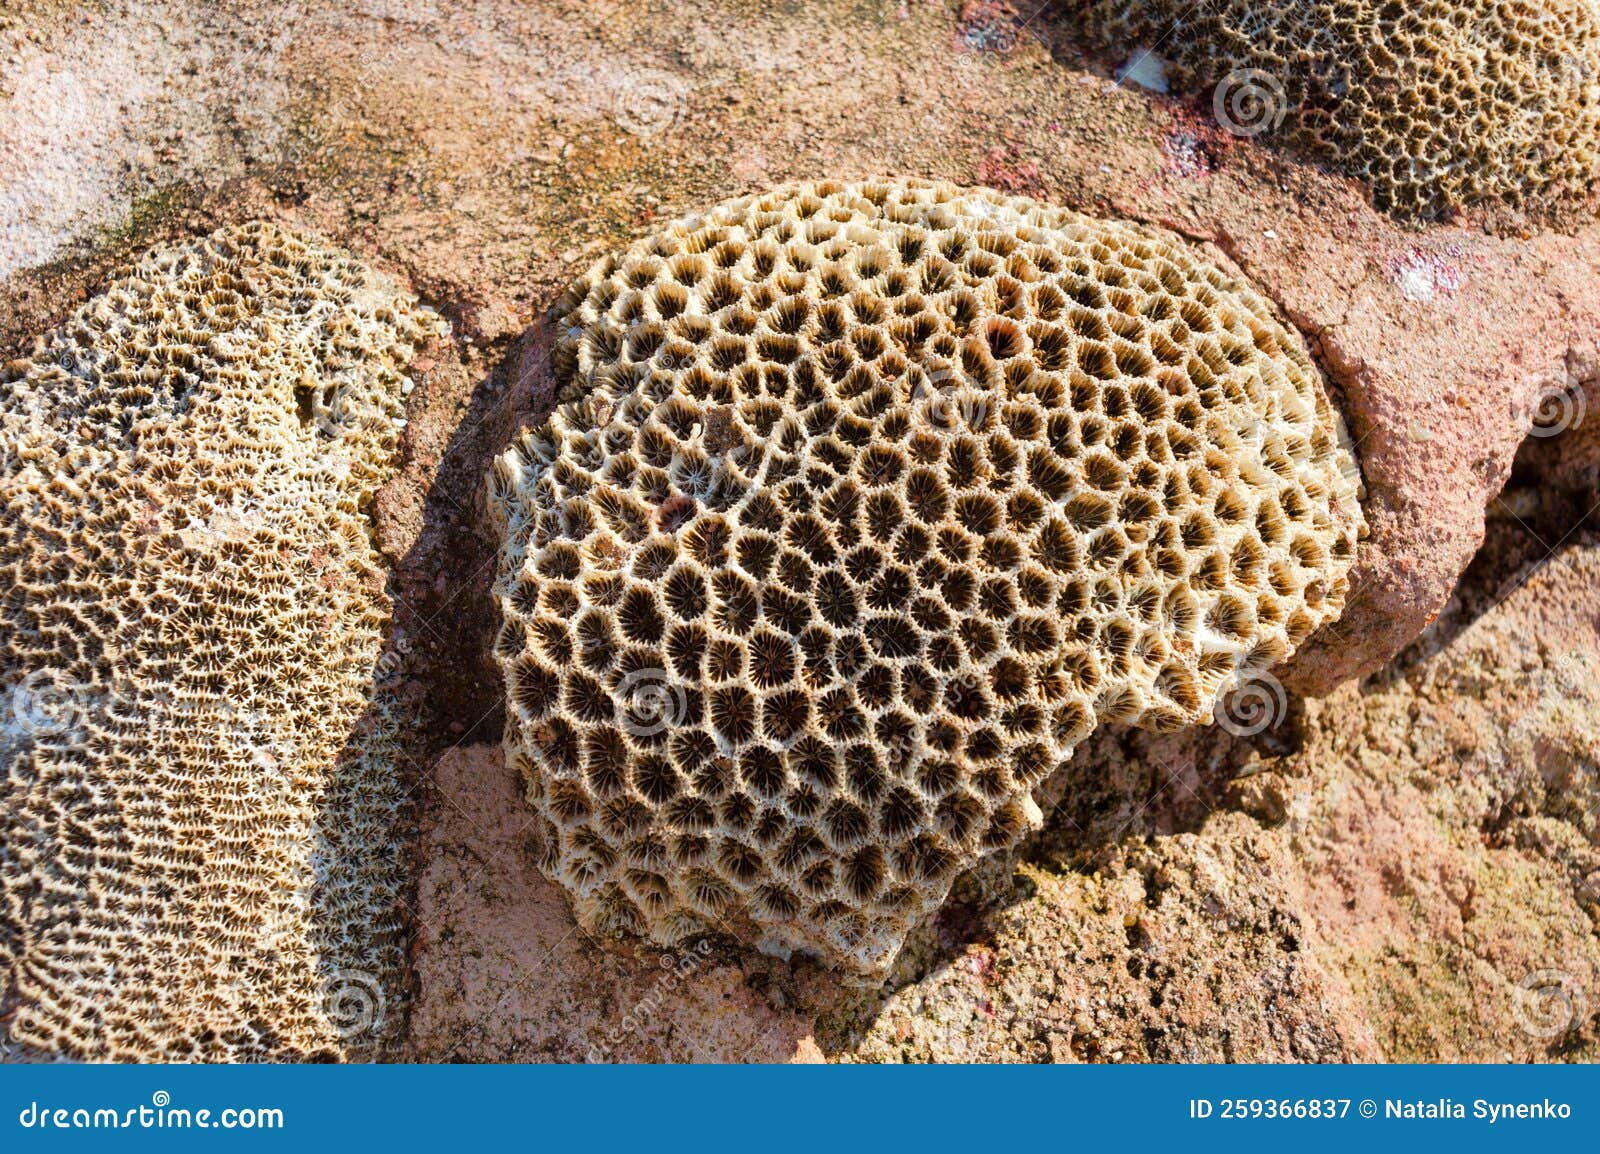 Dead Coral Surface with Structure Elements for Water Filtration